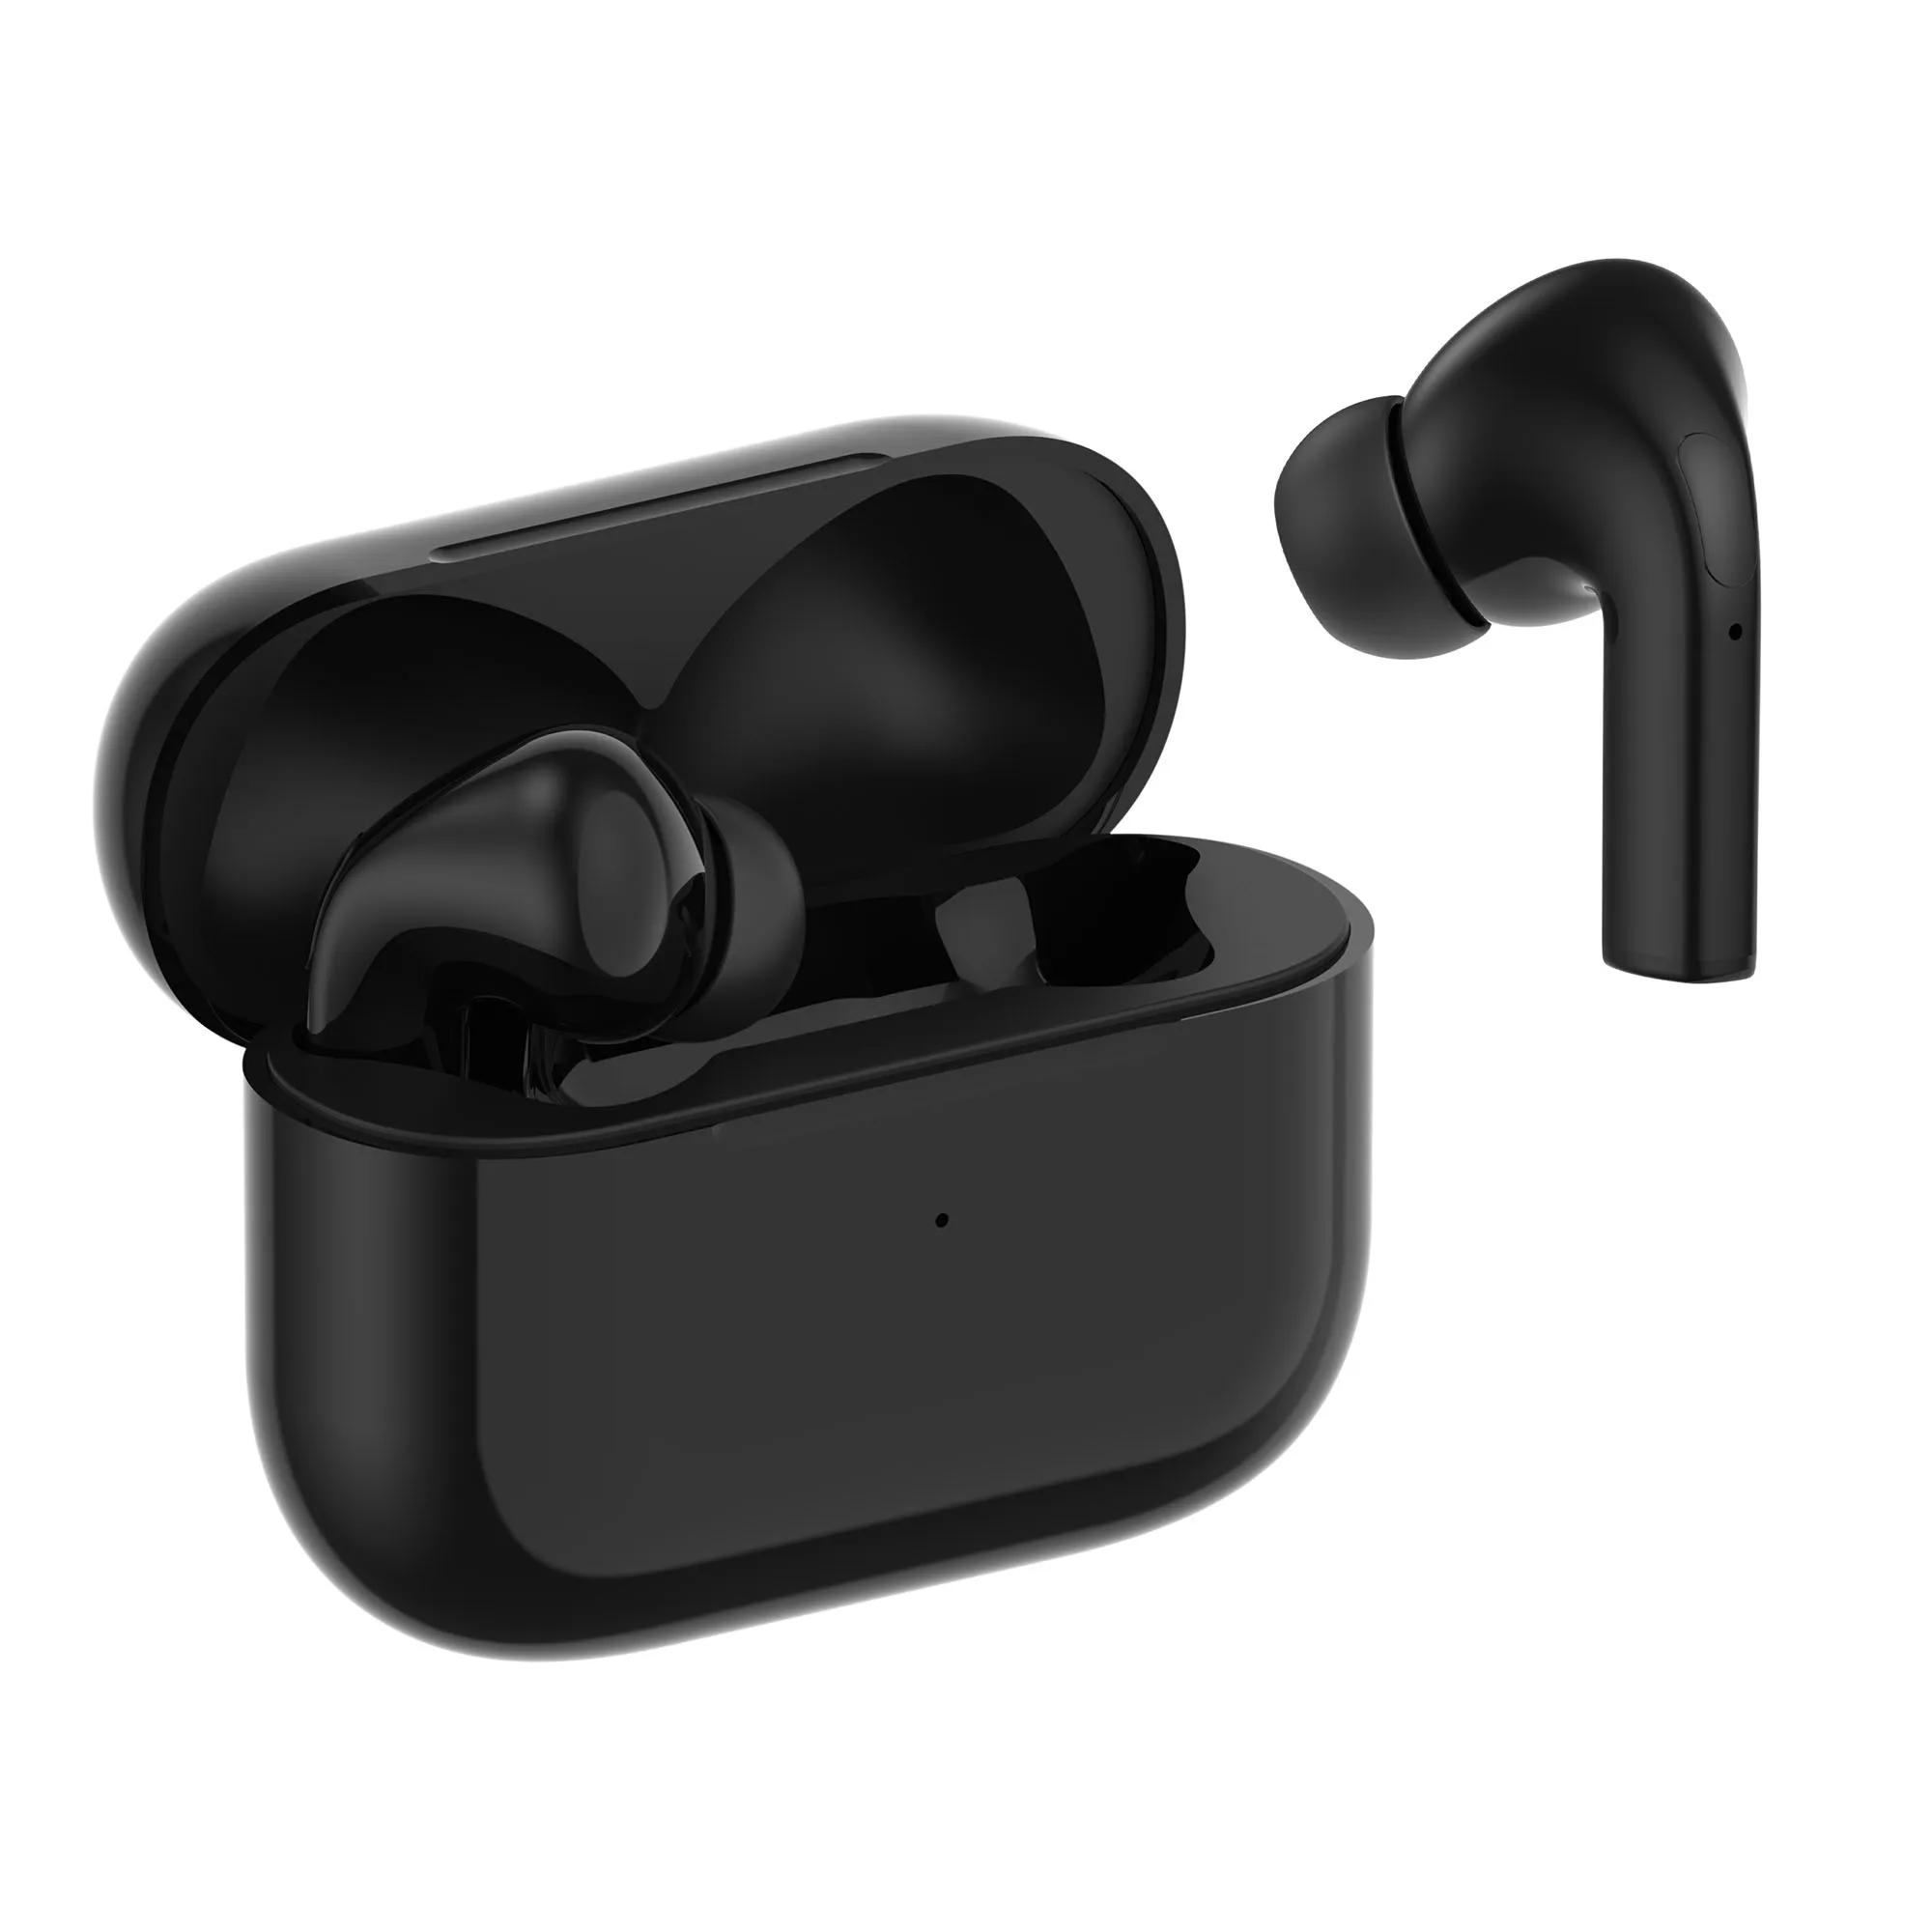 voordelig versnelling herwinnen Built In Charging Case Portable Invisible Bt Earpiece Touch Control True  Twins Tws Bluetooth Wireless I10 Mini Headphone - Buy I10 Mini Headphone,Wireless  I10 Mini Headphone,Tws Bluetooth Wireless I10 Mini Headphone Product